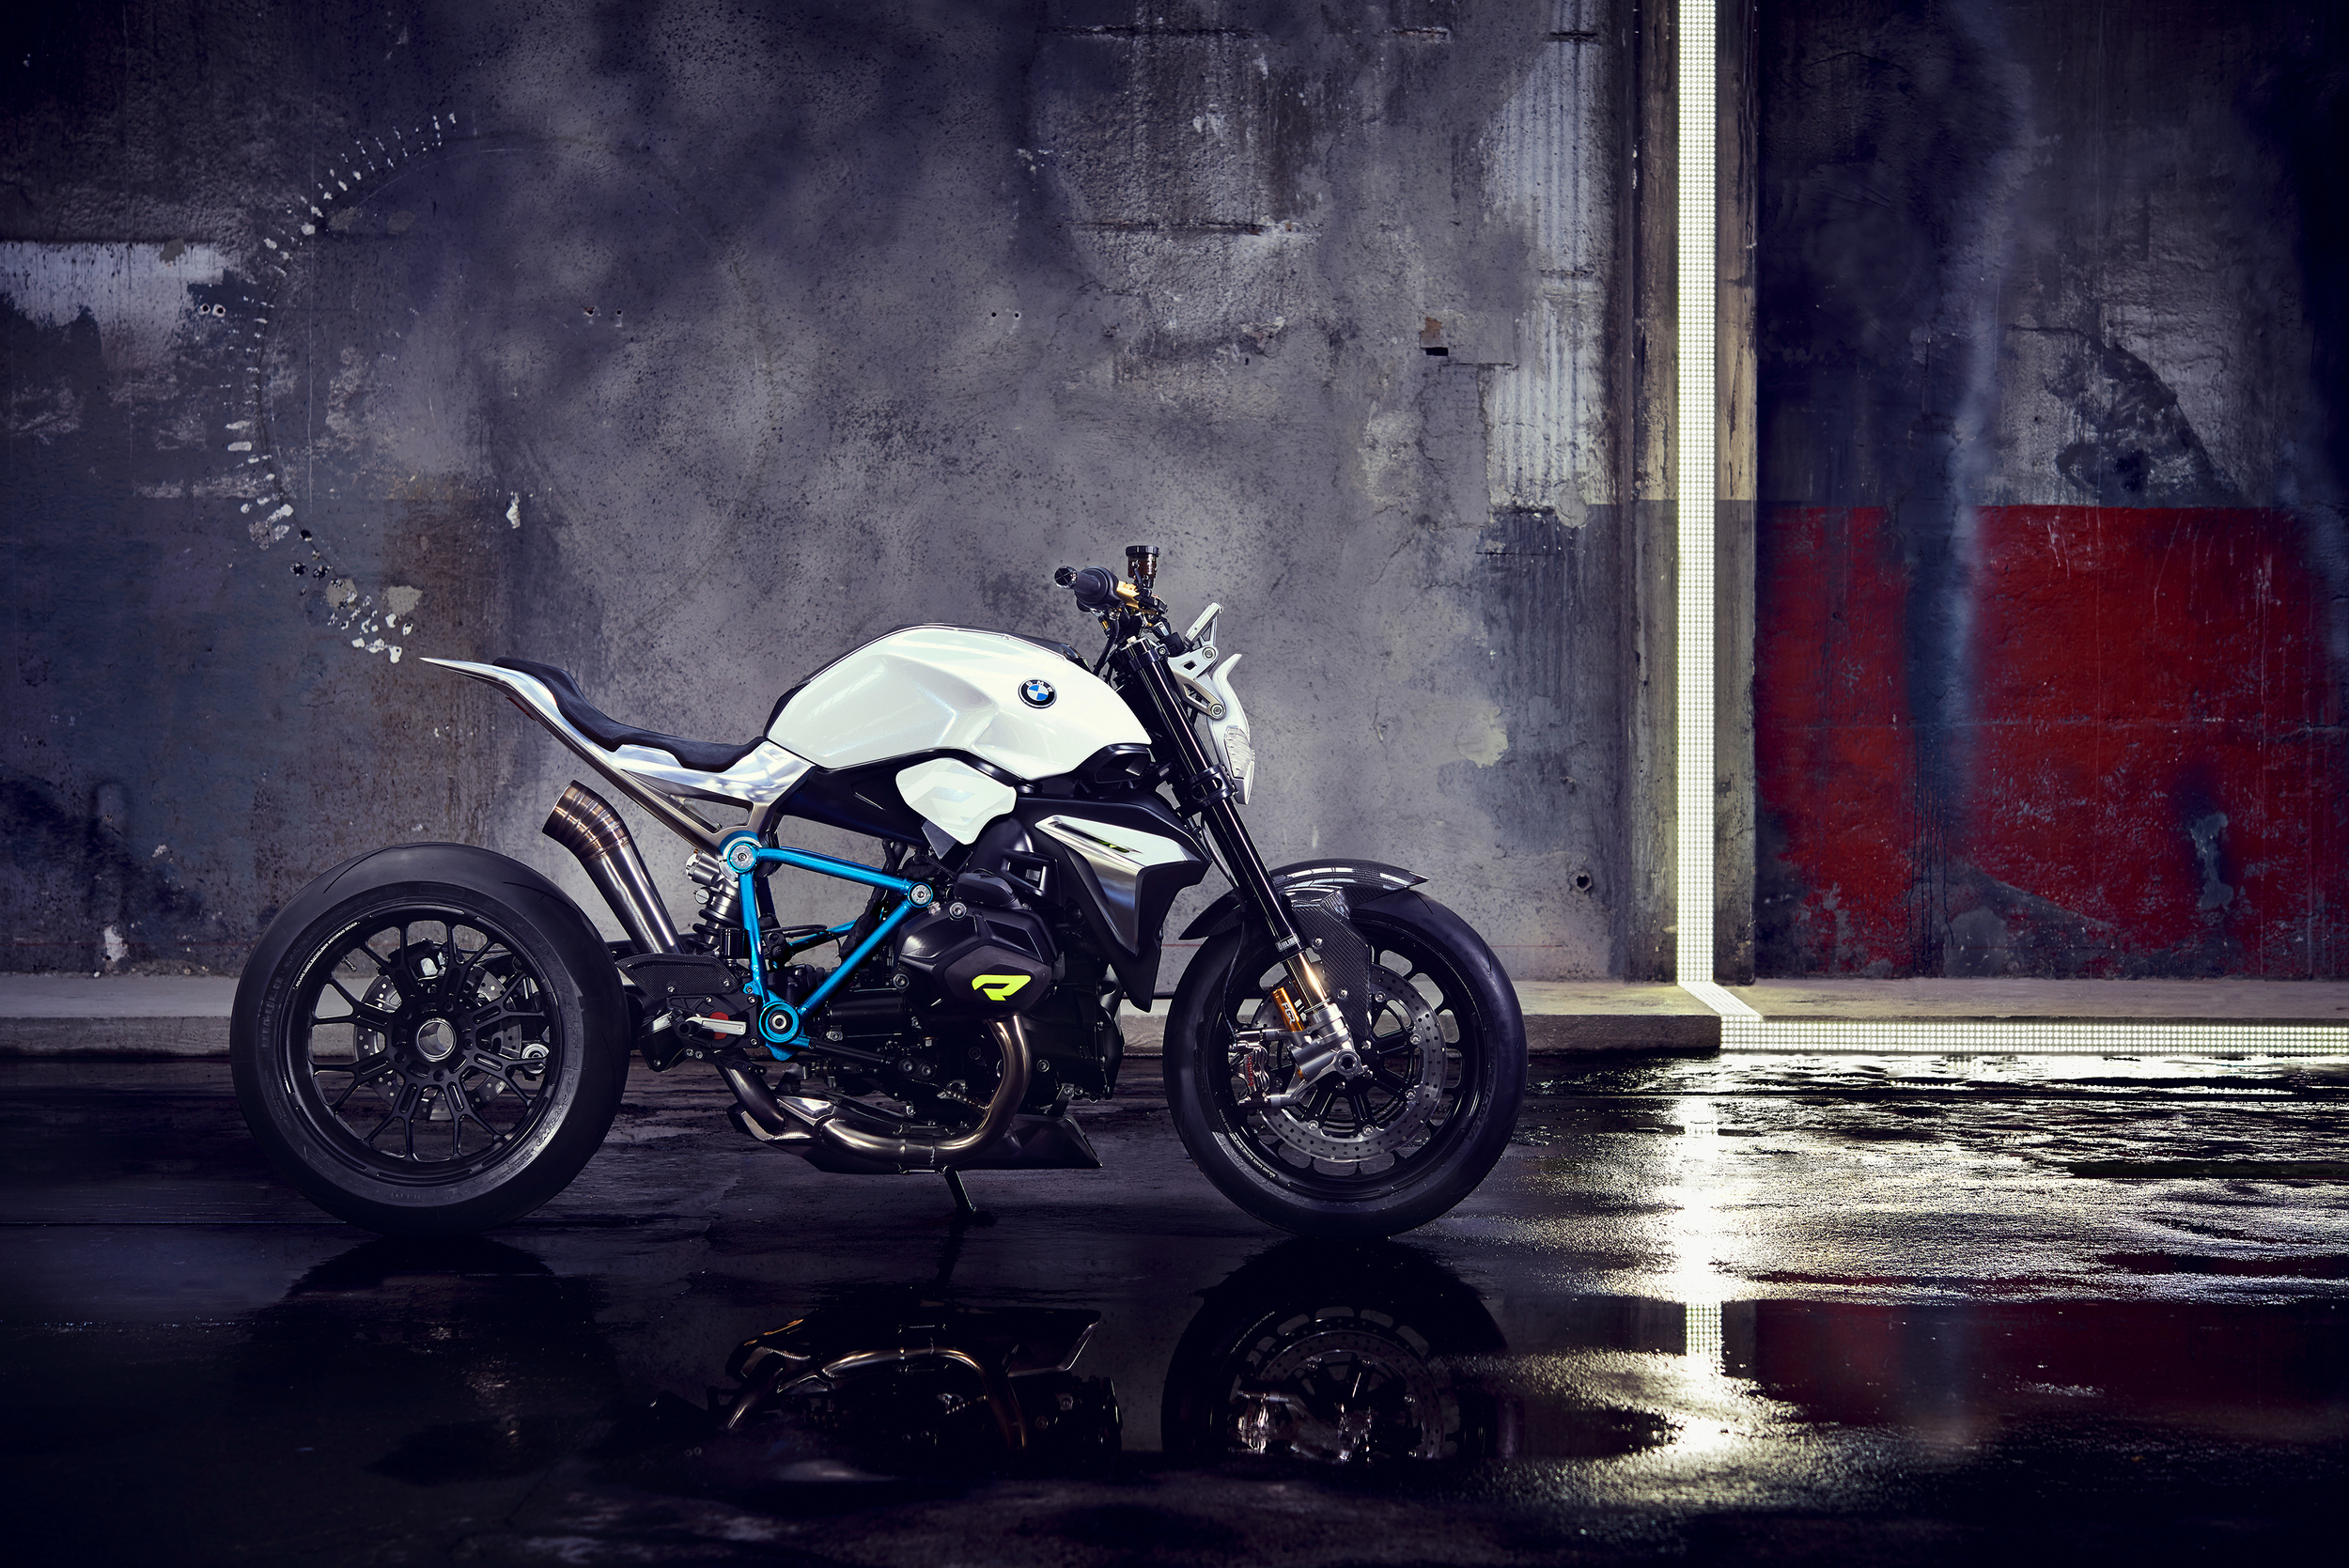 Wallpapers BMW motorcycles Behance on the desktop